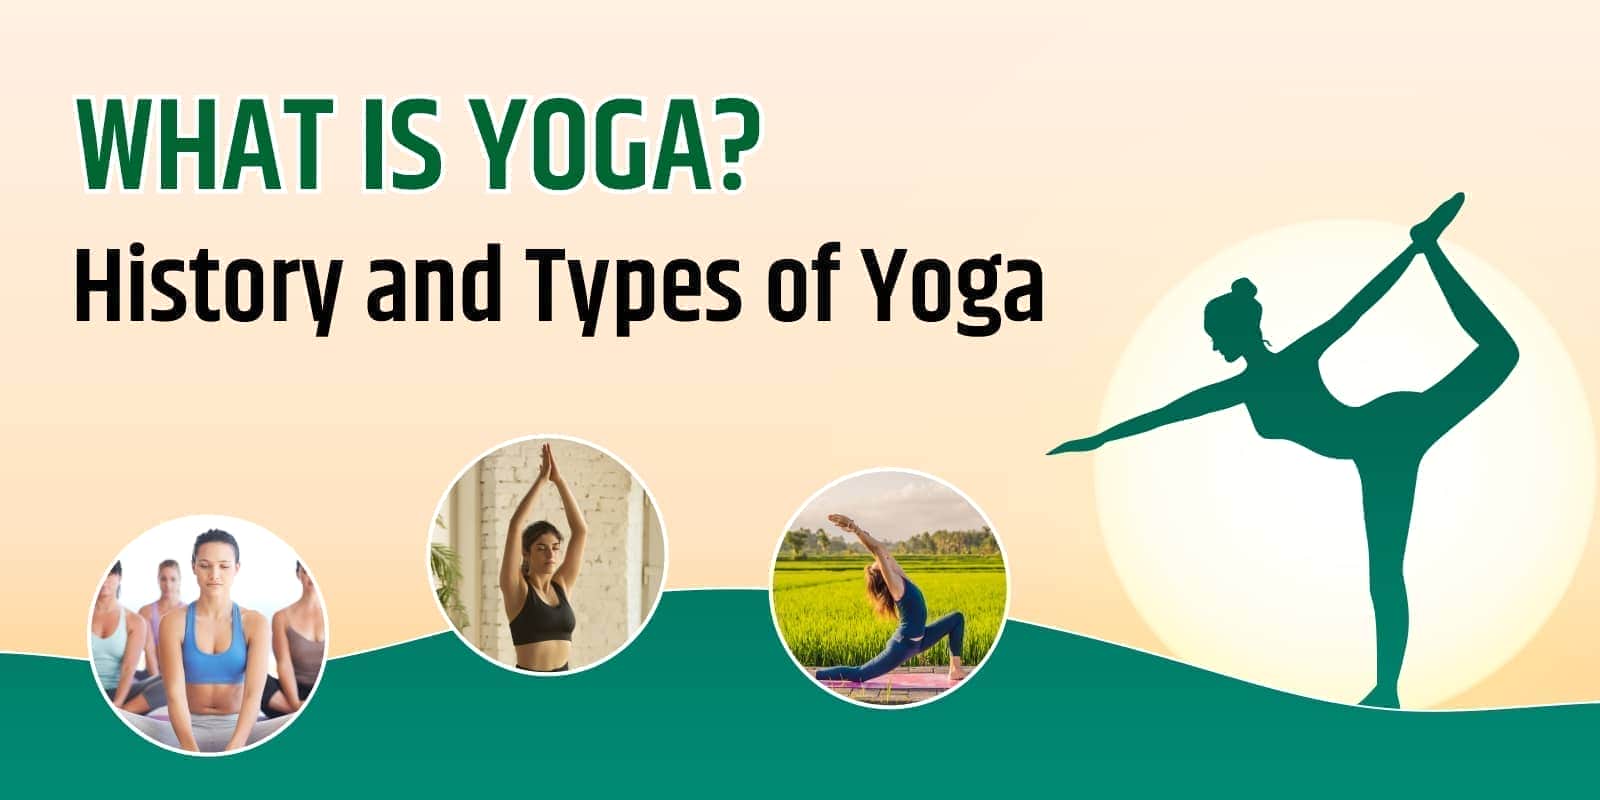 What is Yoga? History and Types of Yoga